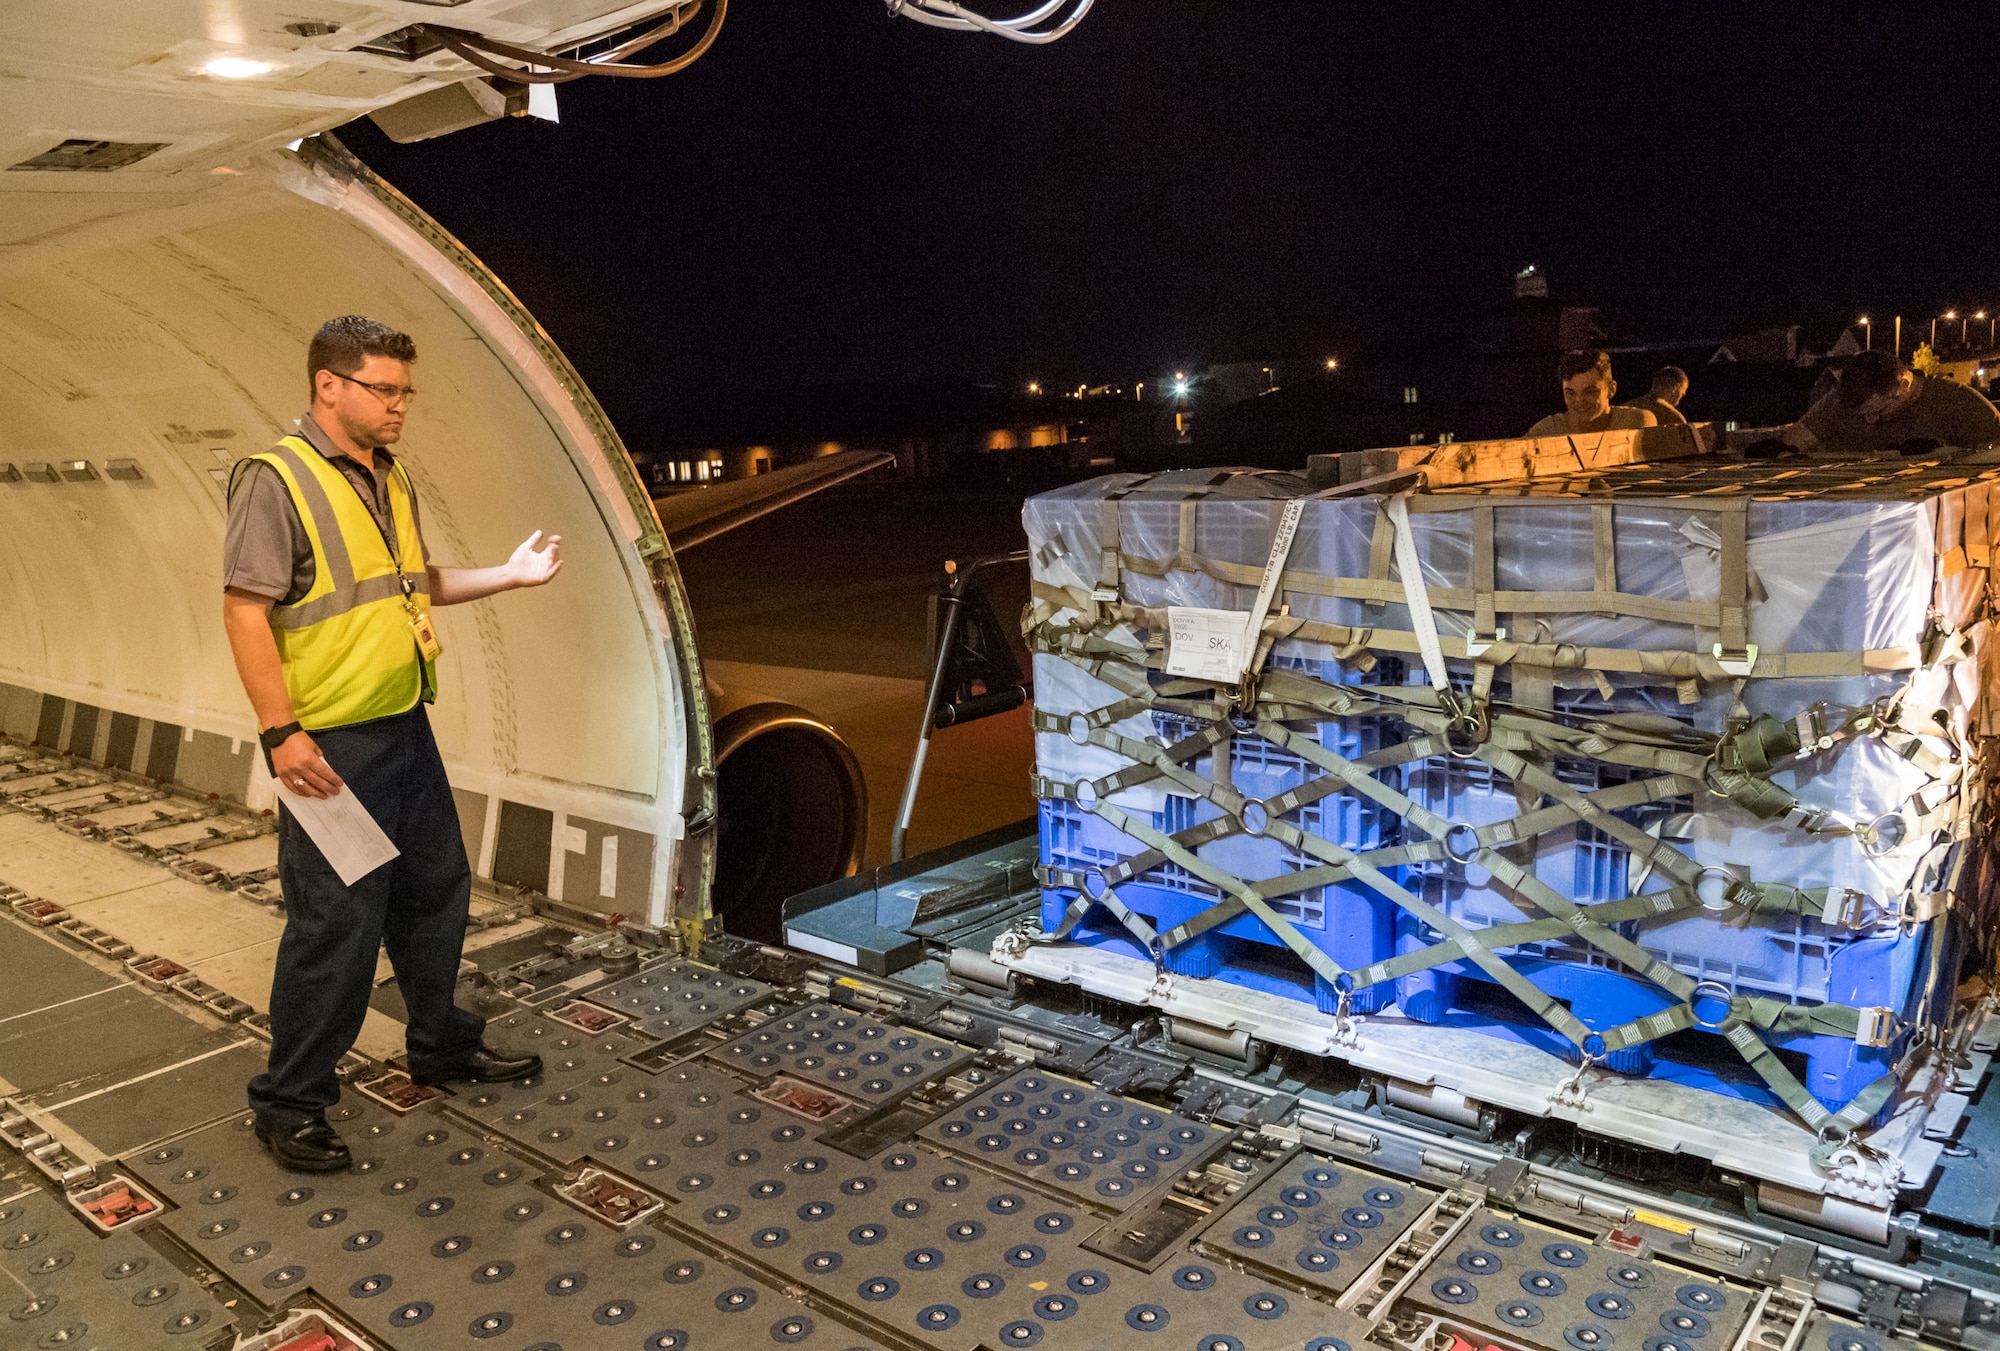 Brian McDonald, Air Transport International senior loadmaster, watches a pallet being loaded Sept. 8, 2019, at Dover Air Force Base, Del. The ATI Boeing 757-200 aircraft was contracted to transport cargo and 30 Team Dover personnel to Fairchild AFB, Wash., participating in Mobility Guardian 2019. “Air Mobility Command’s commercial airlift partners are a vital part of our daily airlift missions around the world as well as our wartime effort,” said Maj. Adam Crane, AMC Headquarters CRAF Branch Chief, Scott AFB, Ill. (U.S. Air Force photo by Roland Balik)